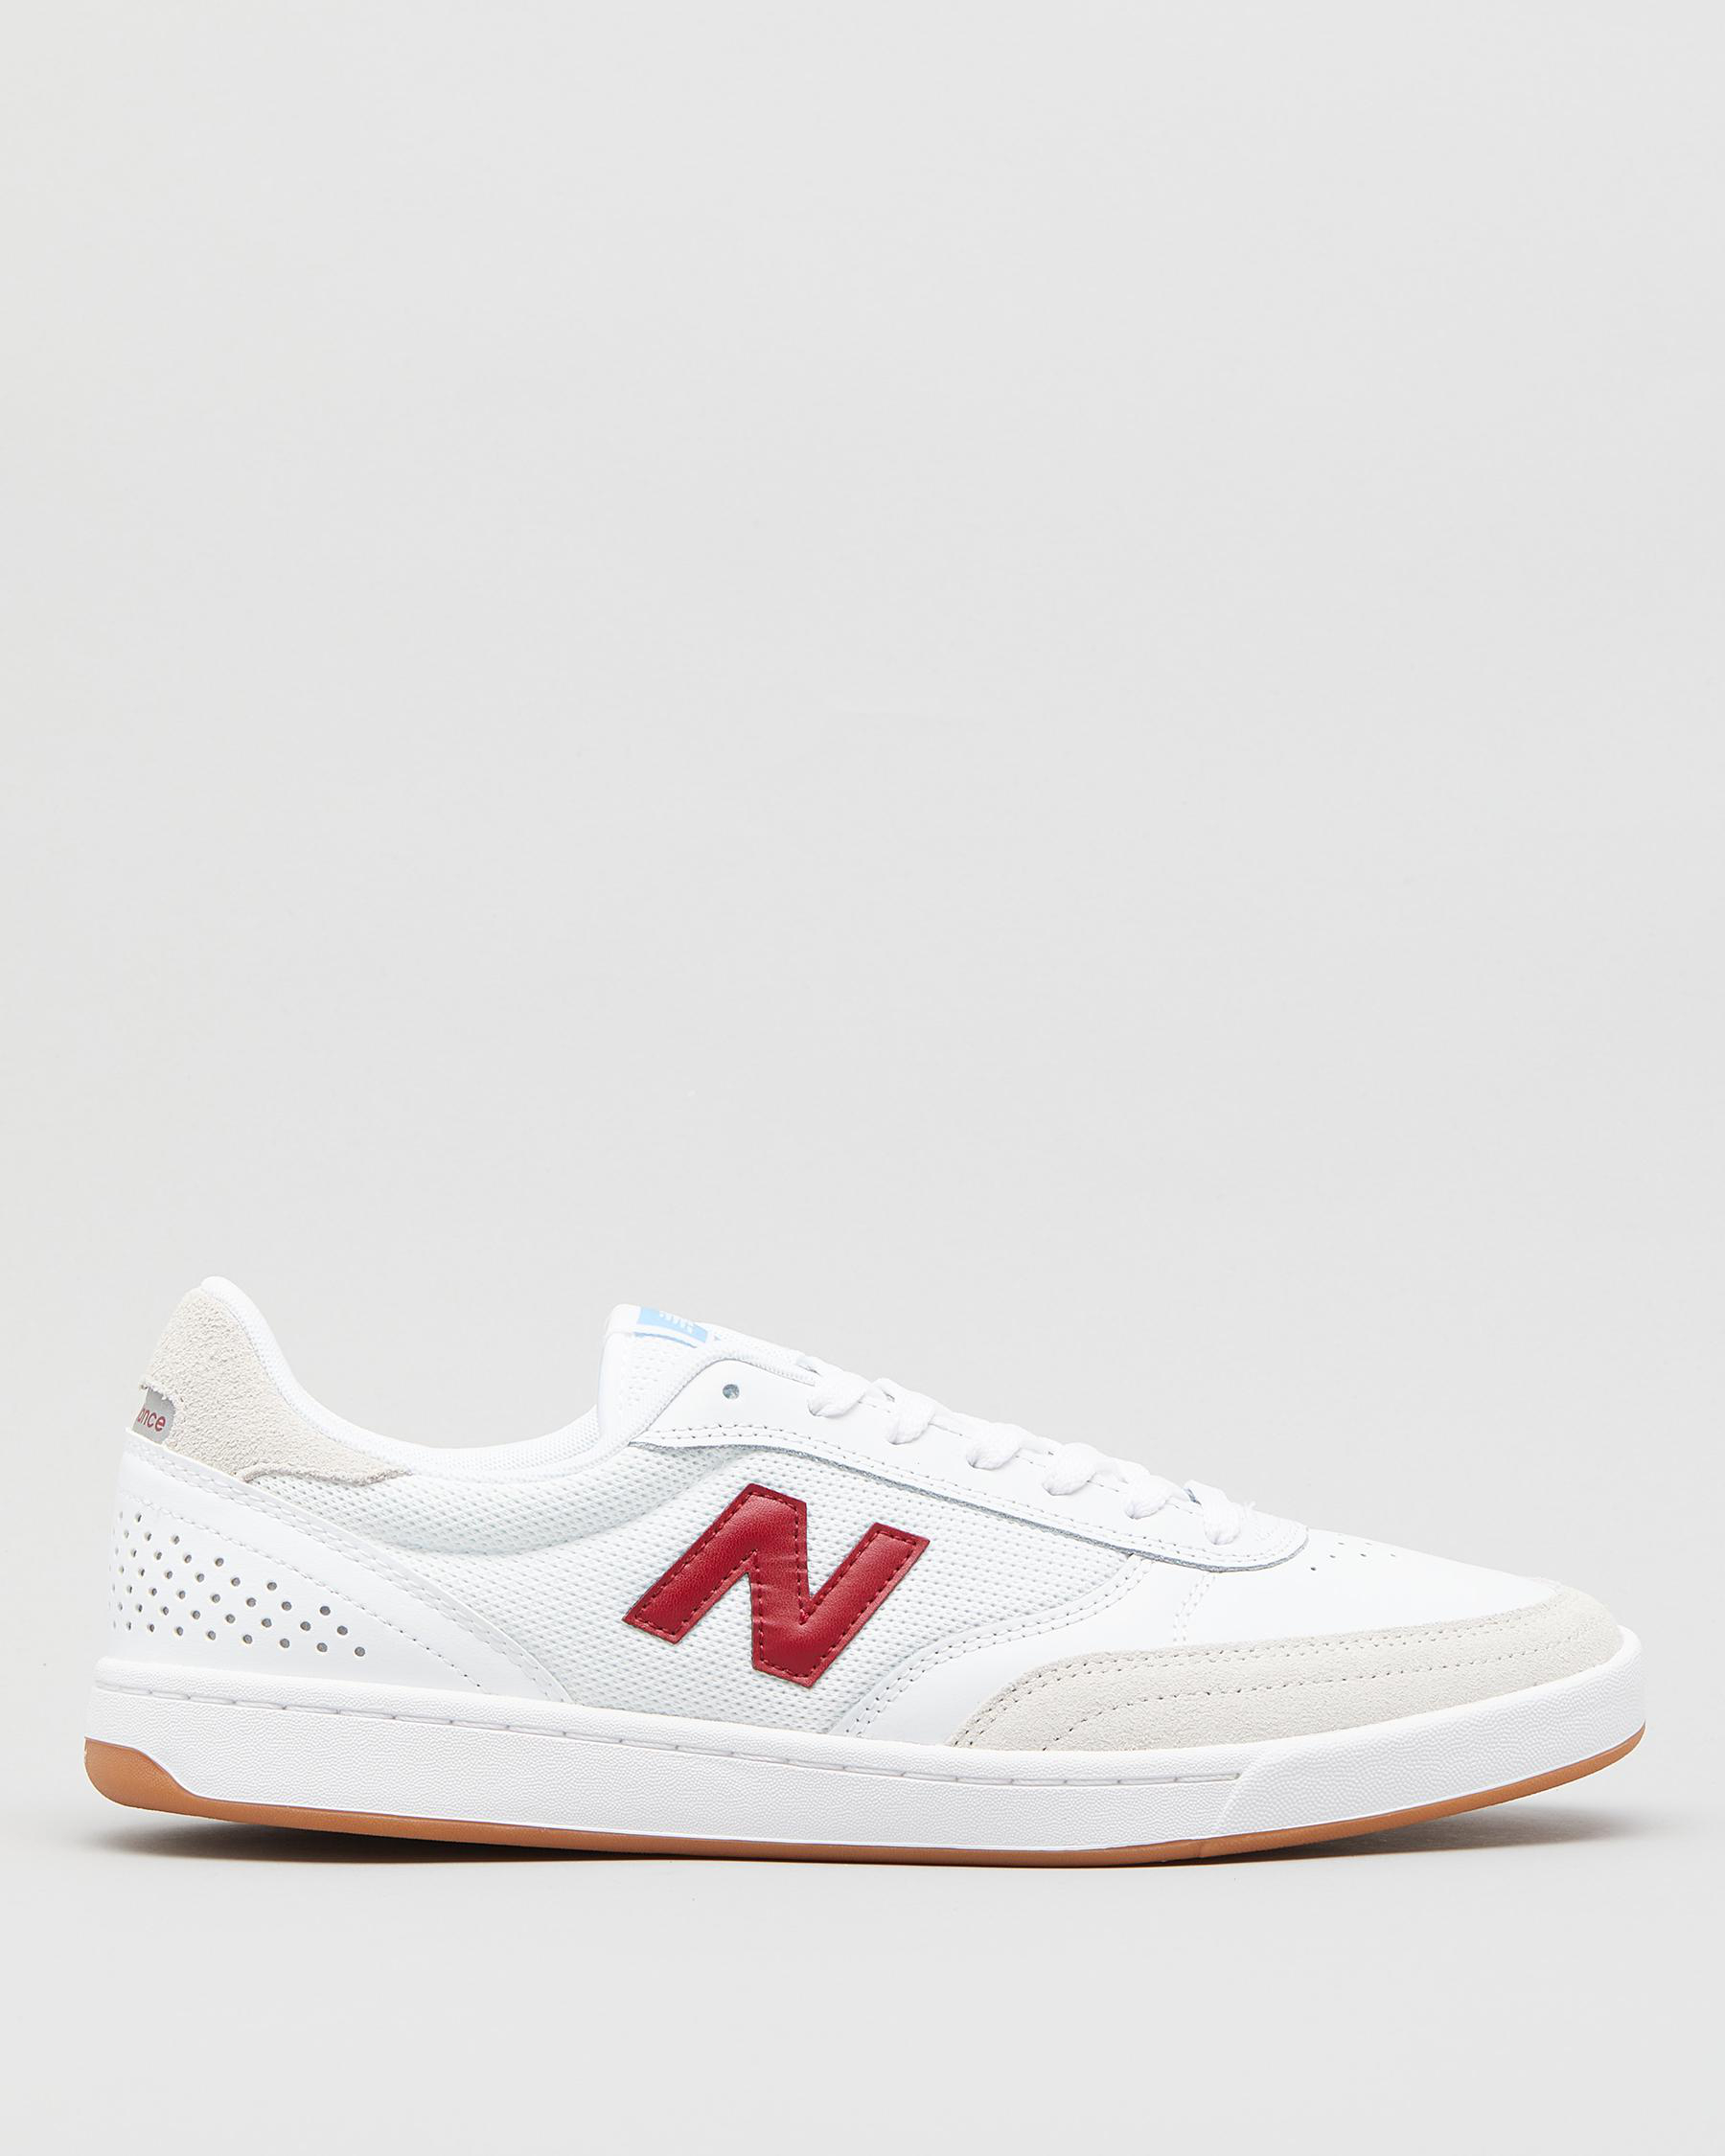 Shop New Balance NB 440 Shoes In White/red - Fast Shipping & Easy ...